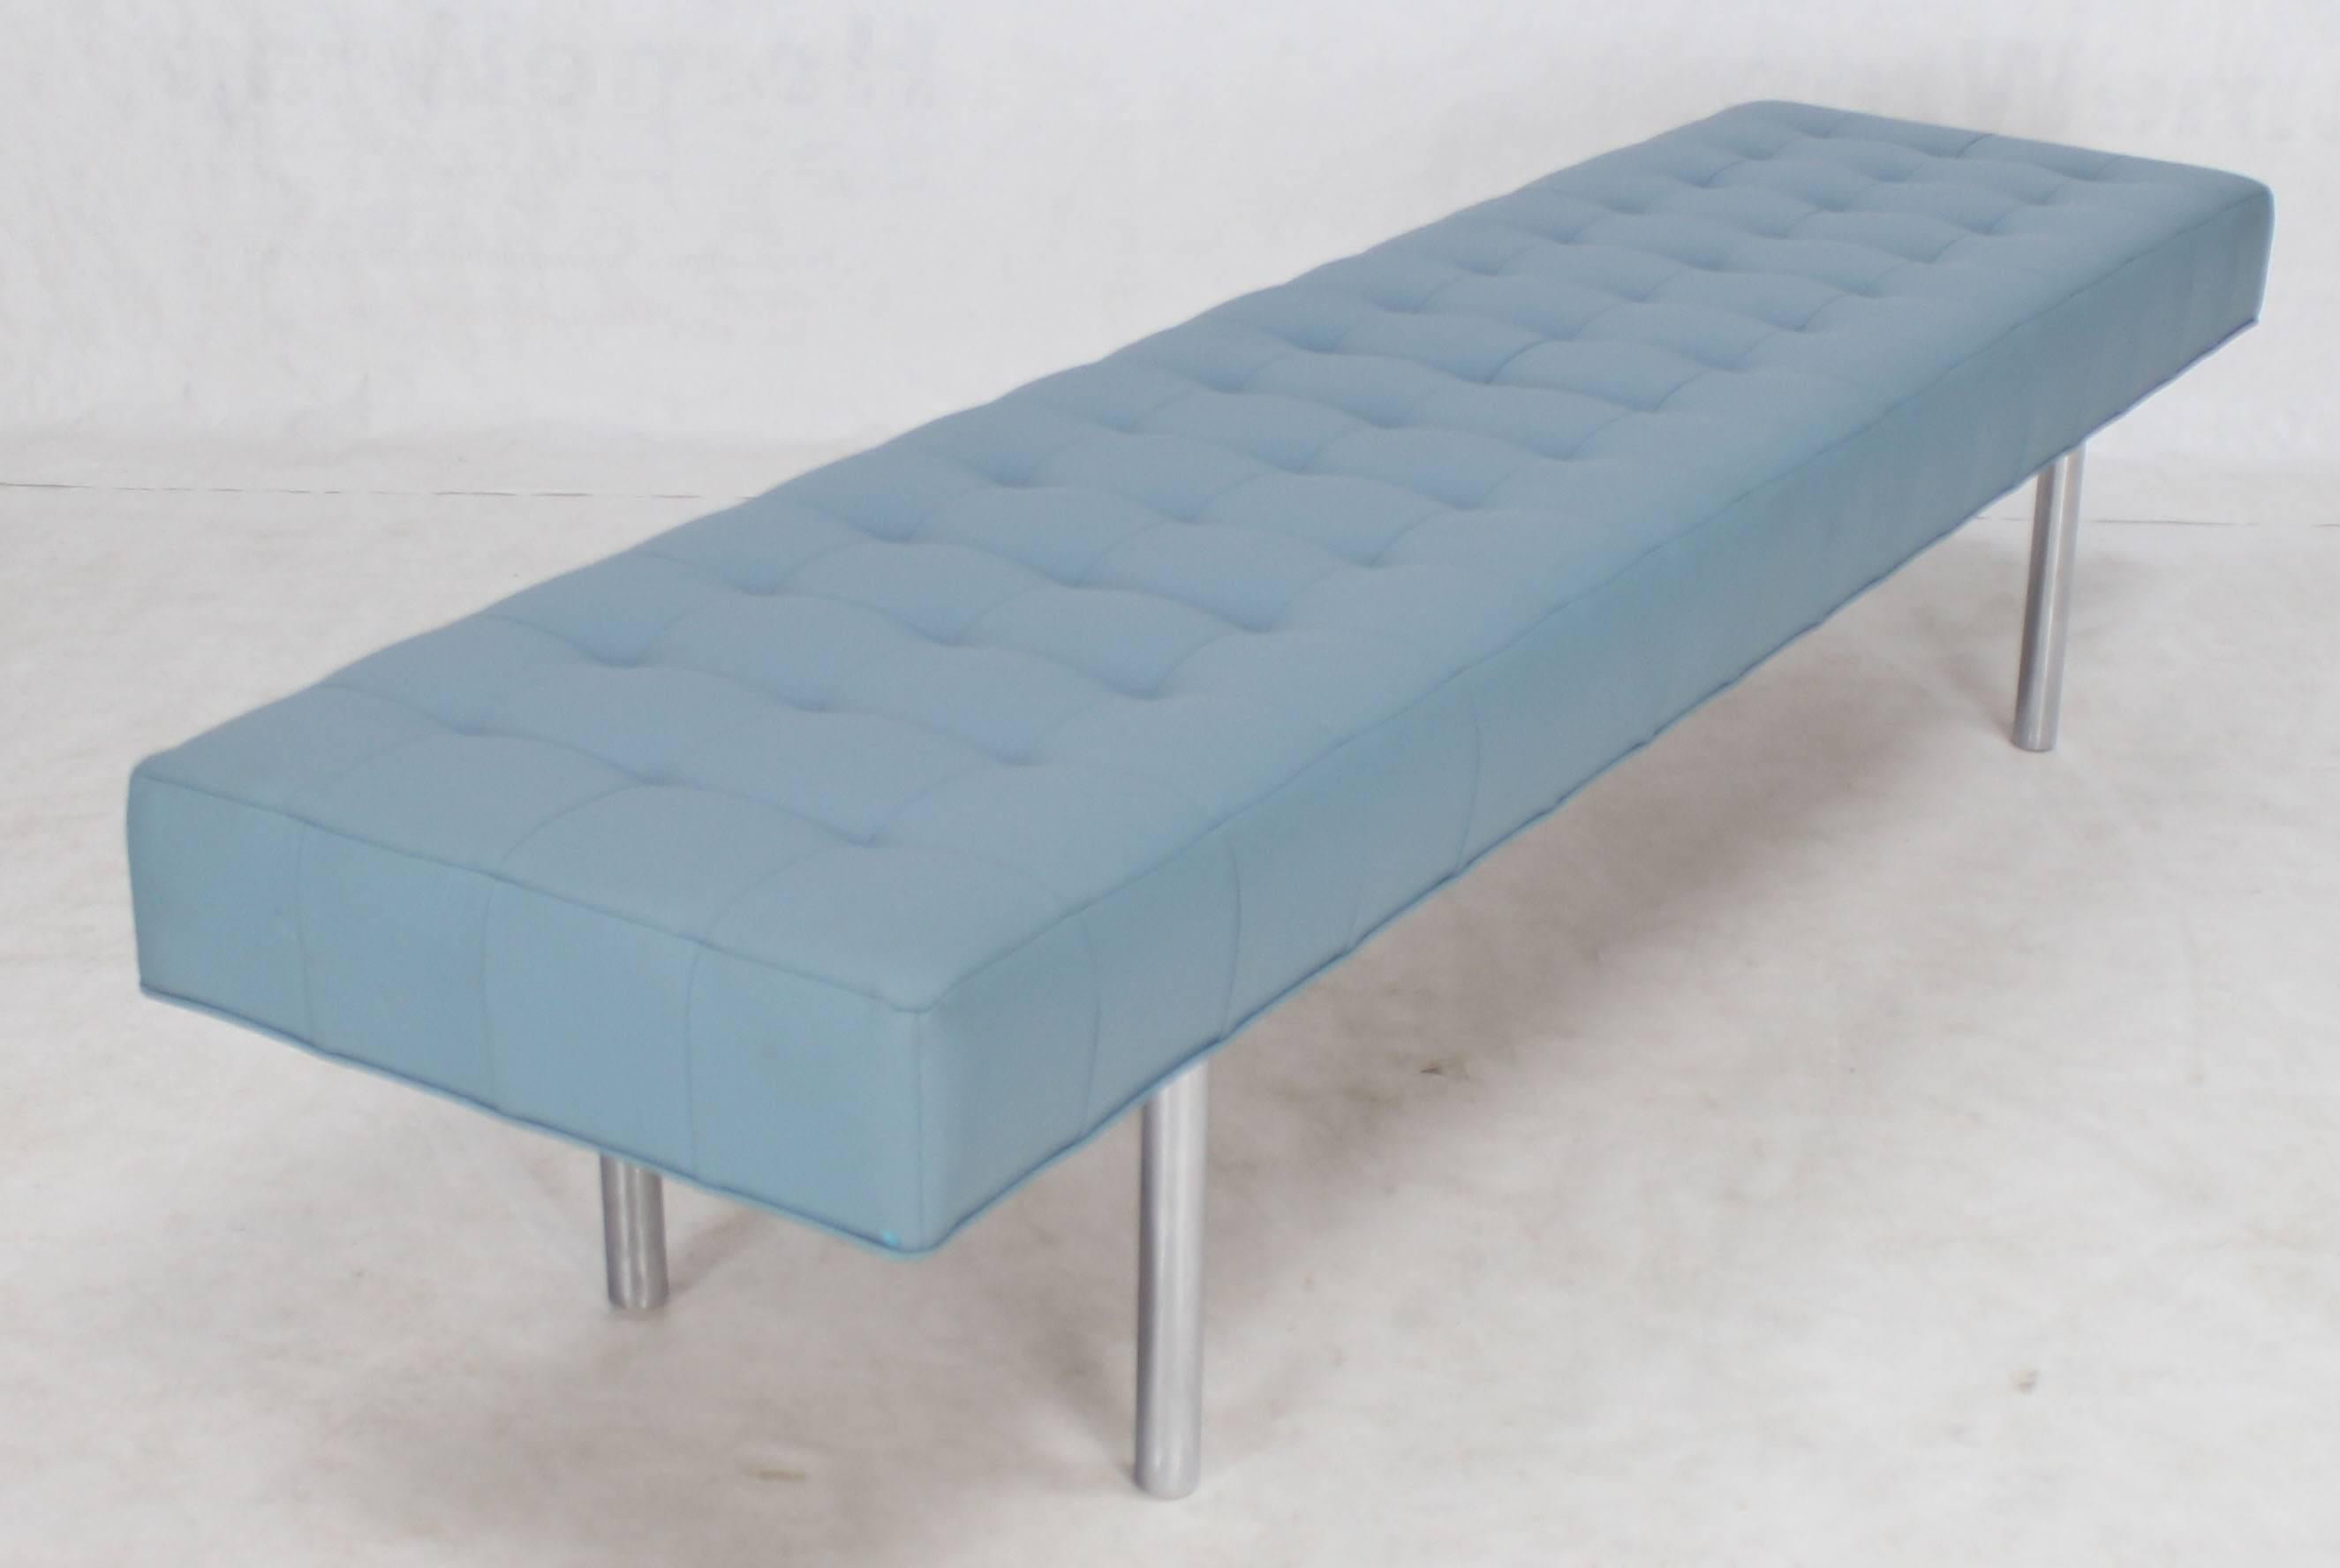 Polished Tufted Light Blue Upholstery Chrome Cylinder Legs Long Bench Almost Daybed